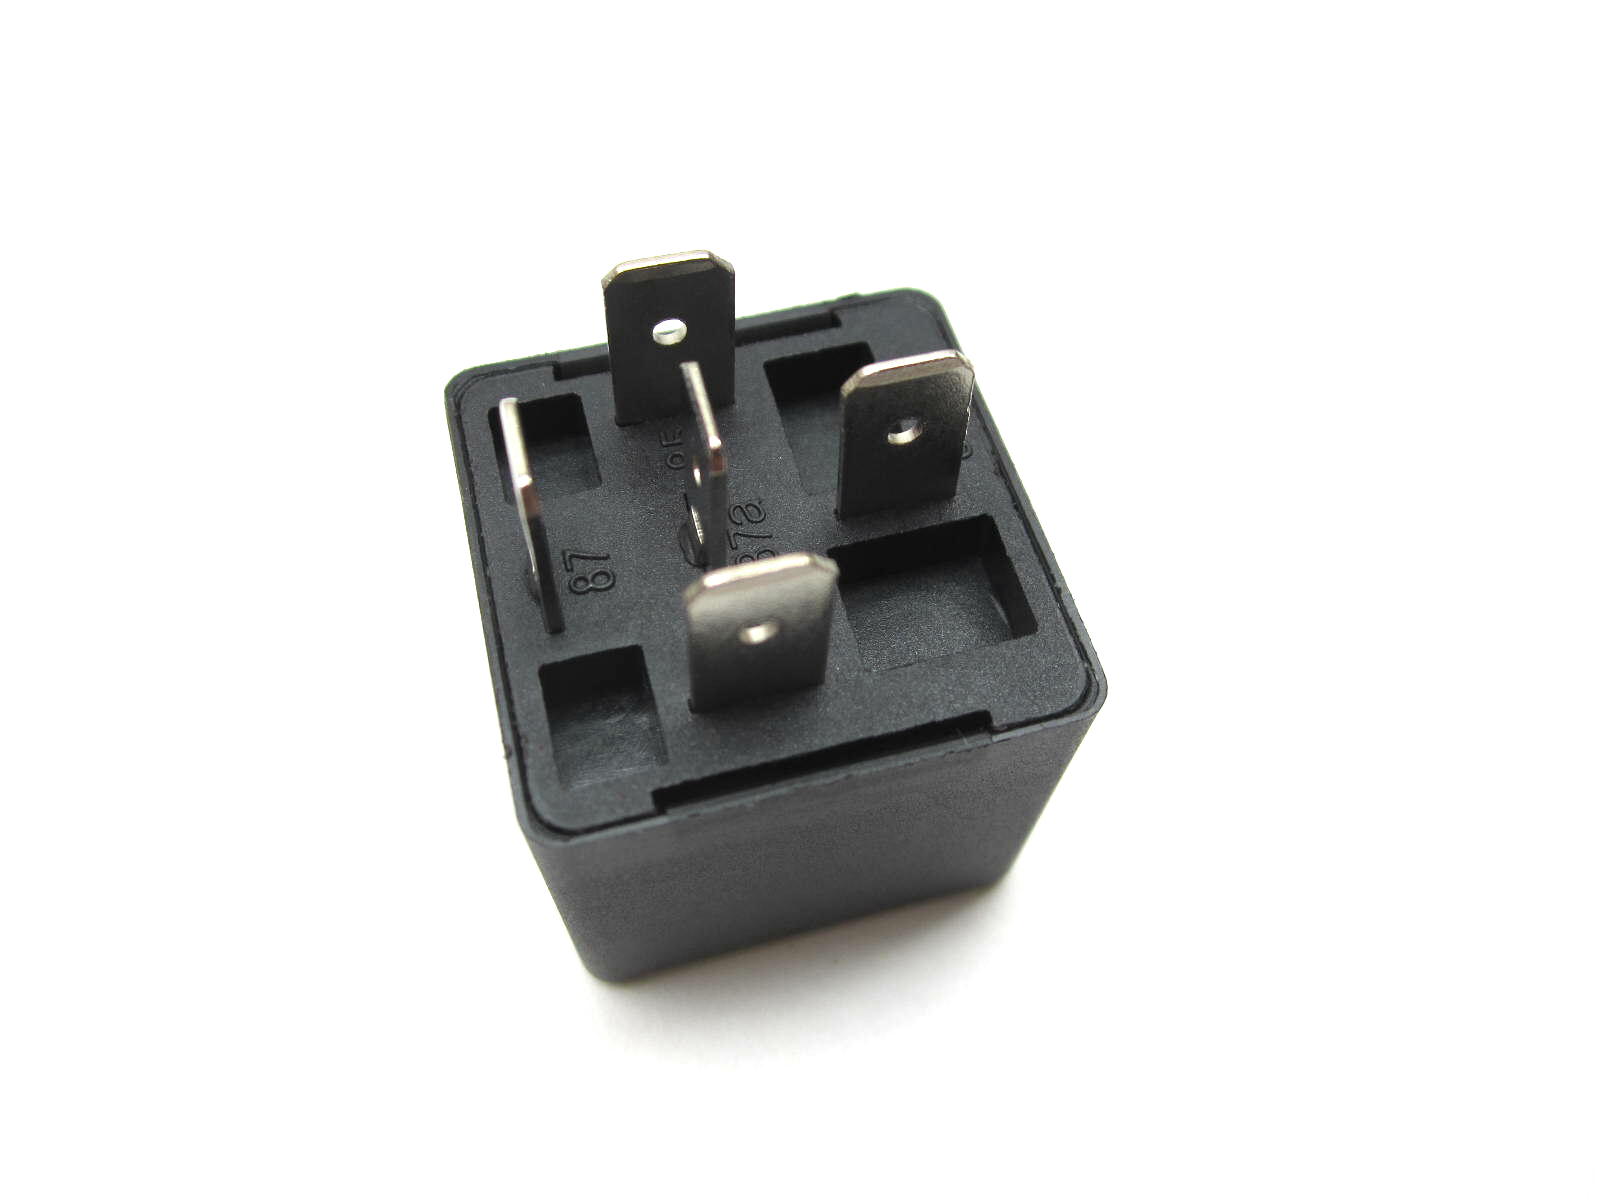 Starter relay 5 pin 12V40A cube LM4/5 Cal3 Mille 1000S SP3 - Click Image to Close